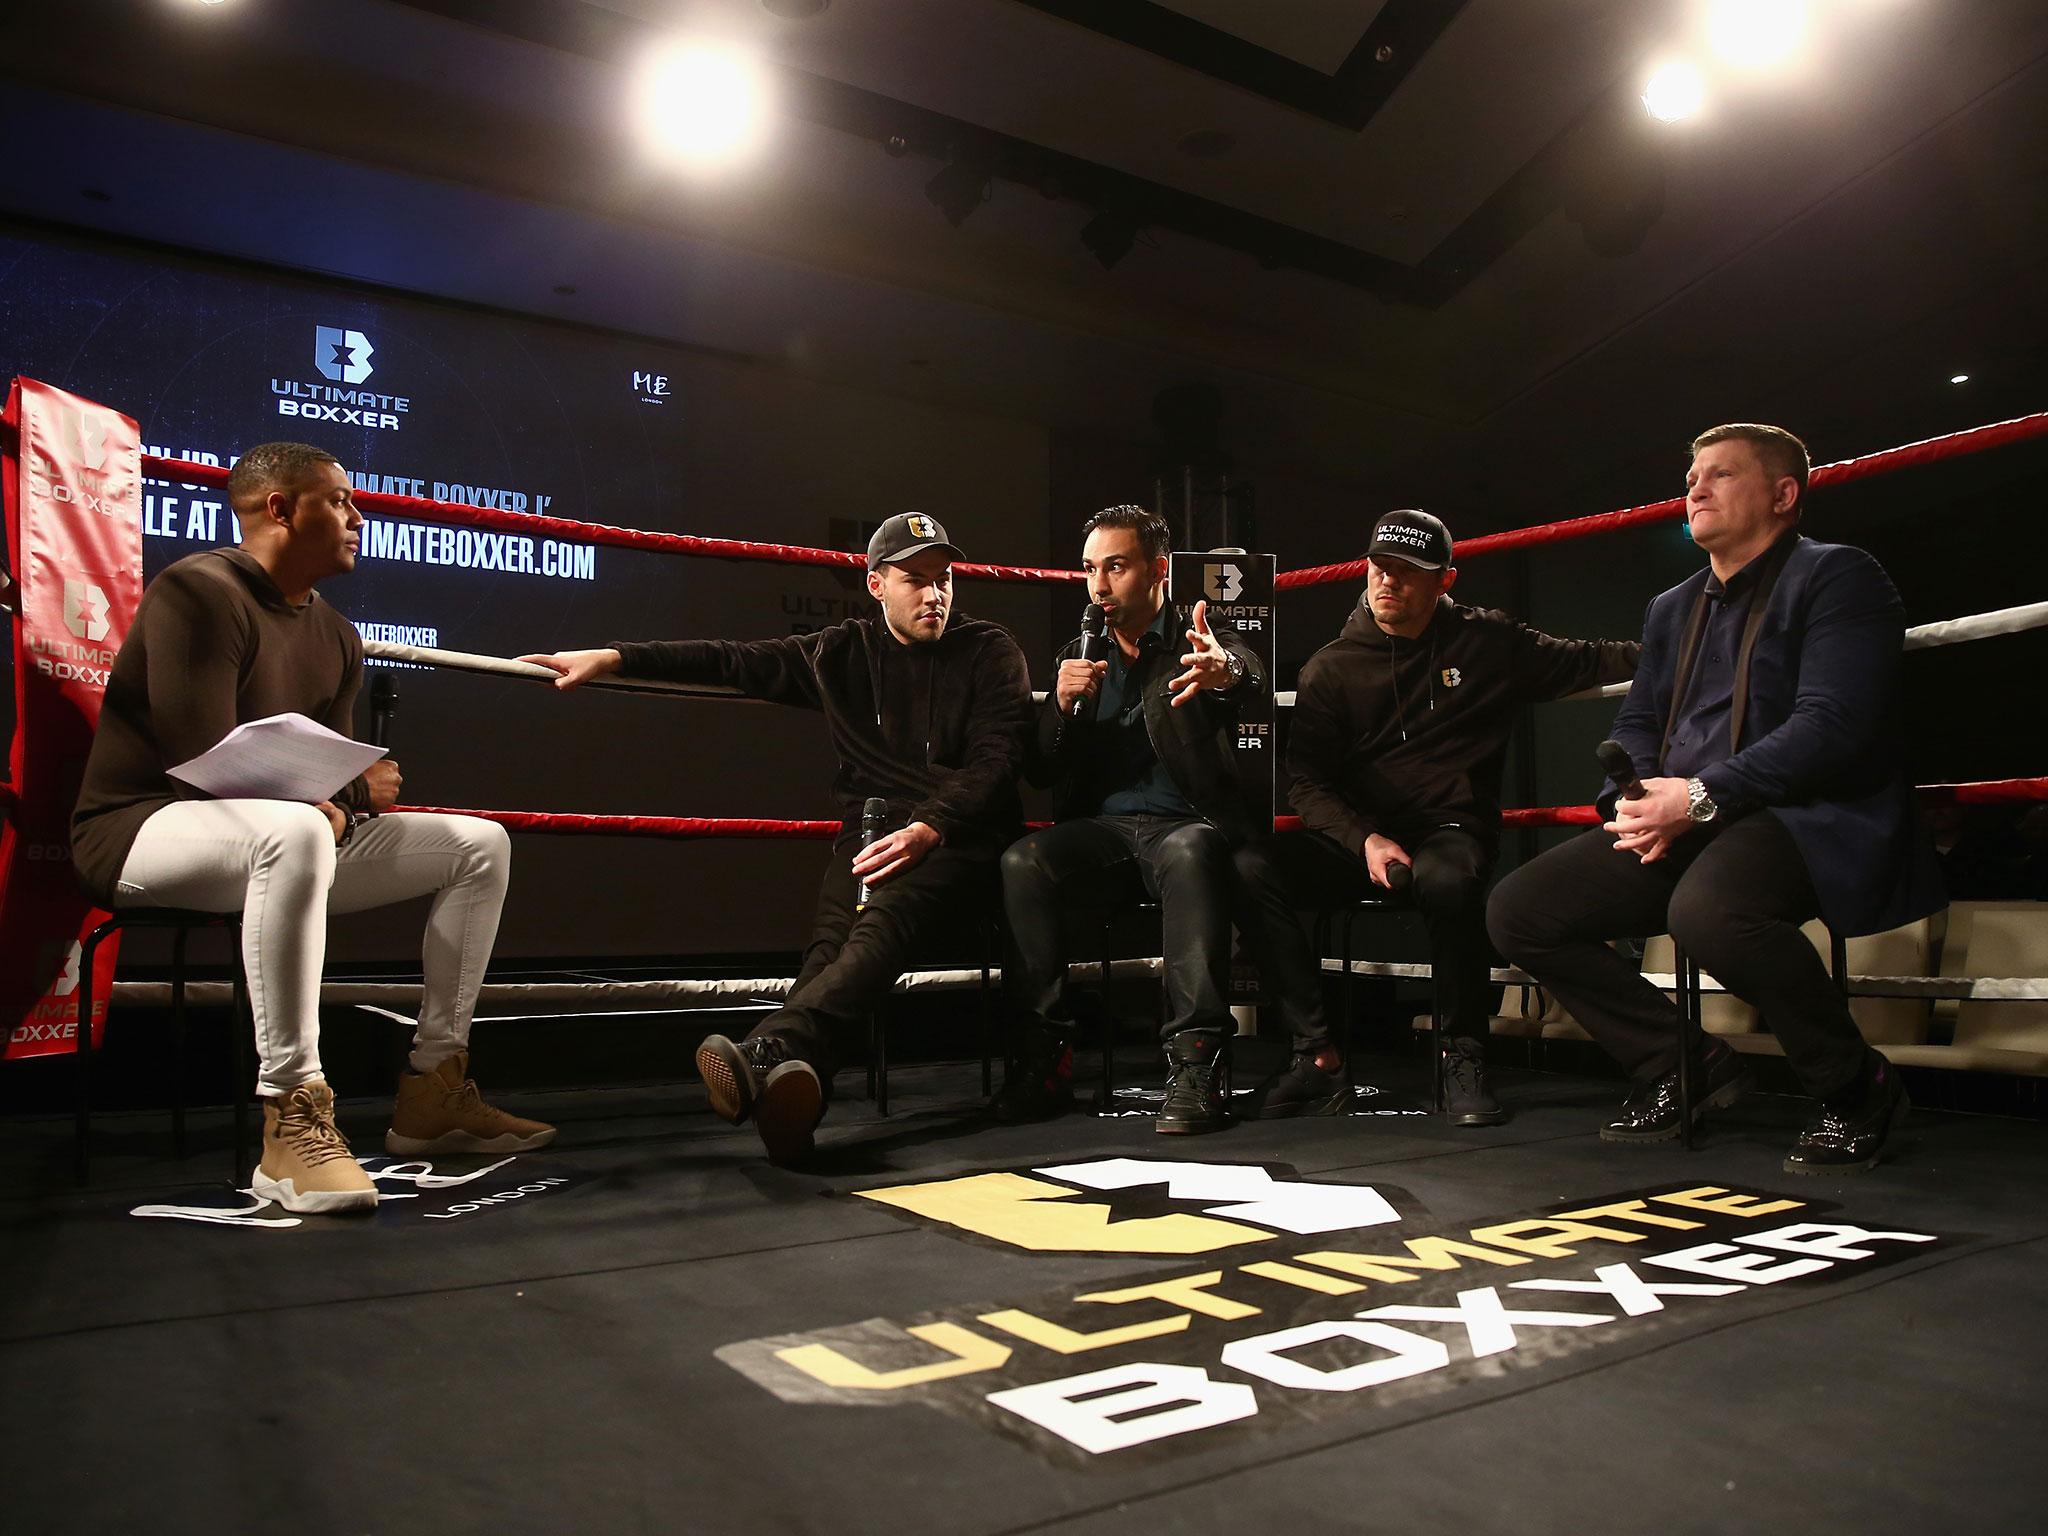 Ultimate Boxxer was launched on Monday and kicks off in April of this year